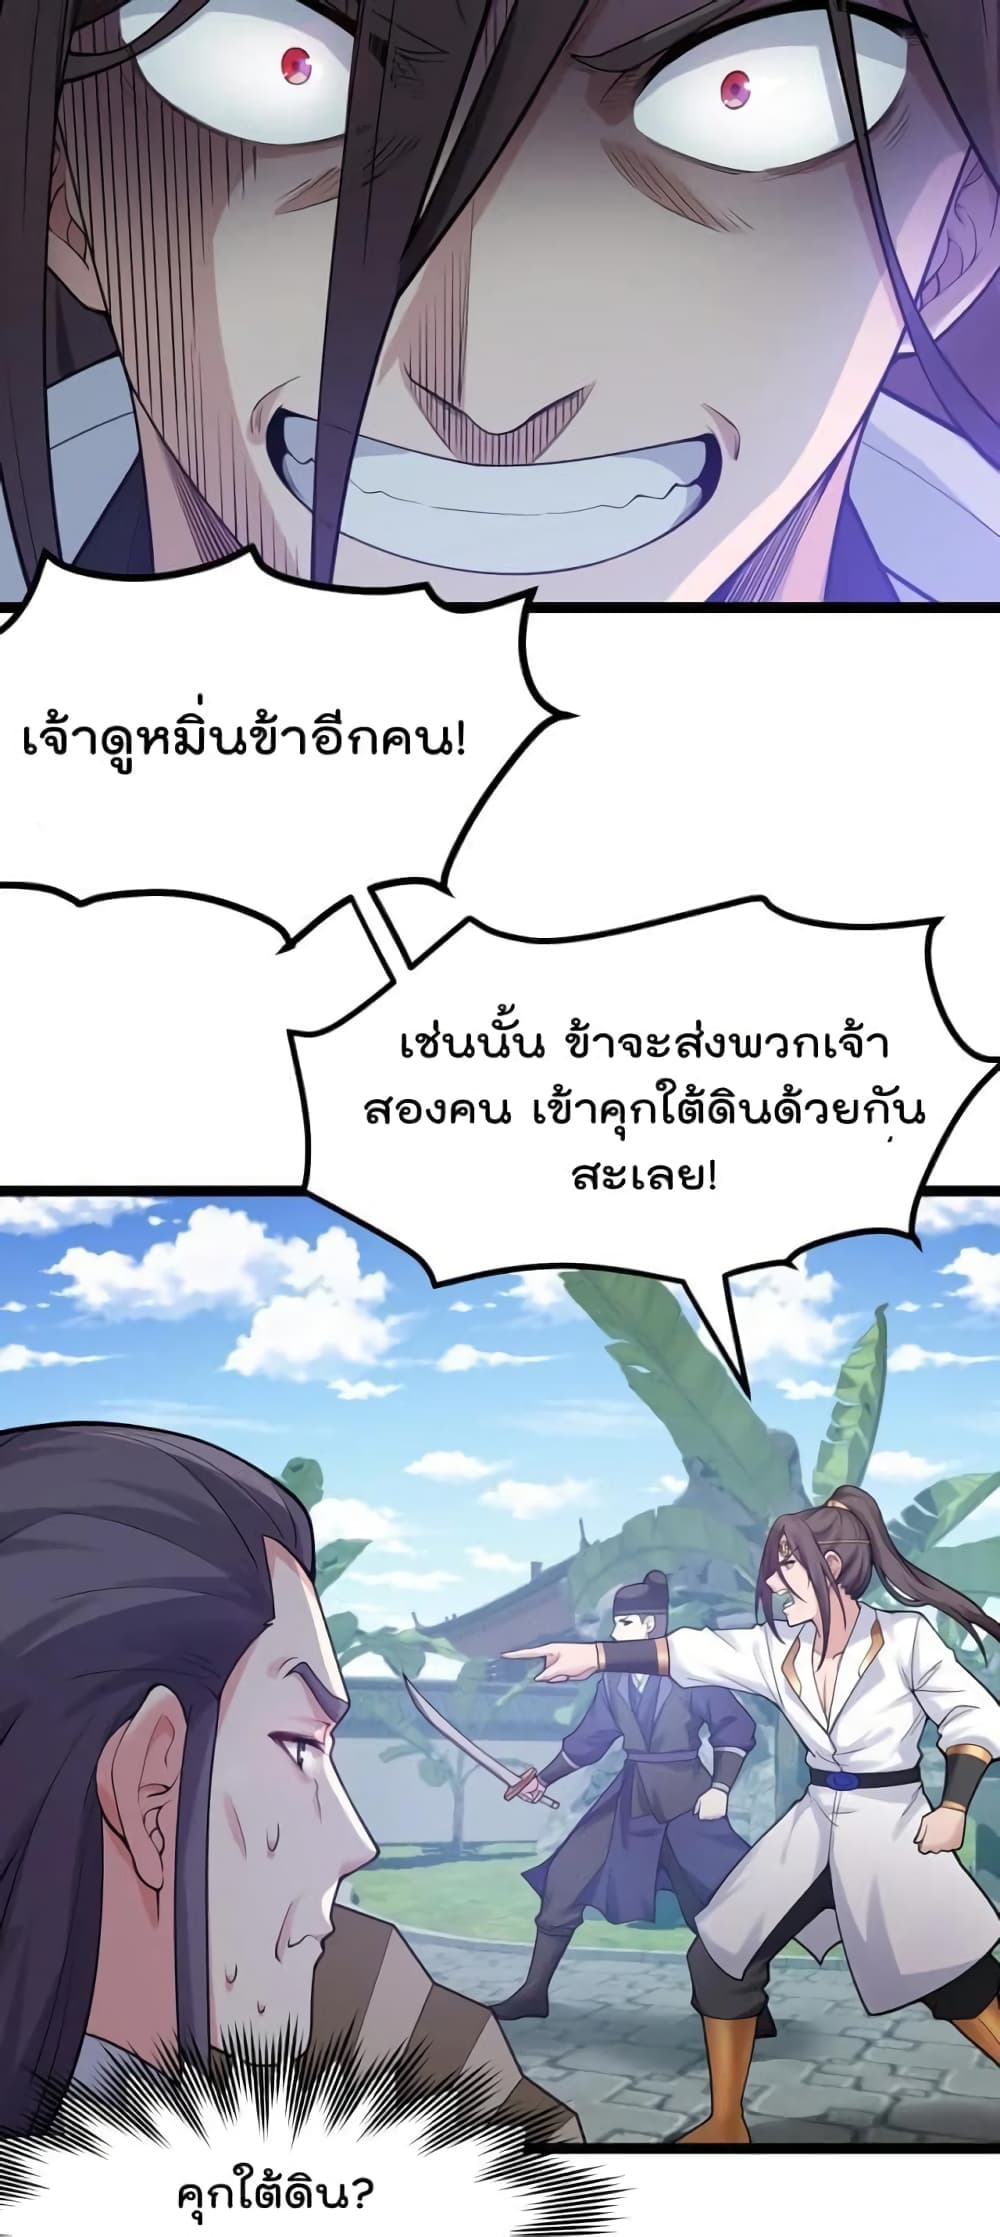 Godsian Masian from Another World ตอนที่ 114 (28)